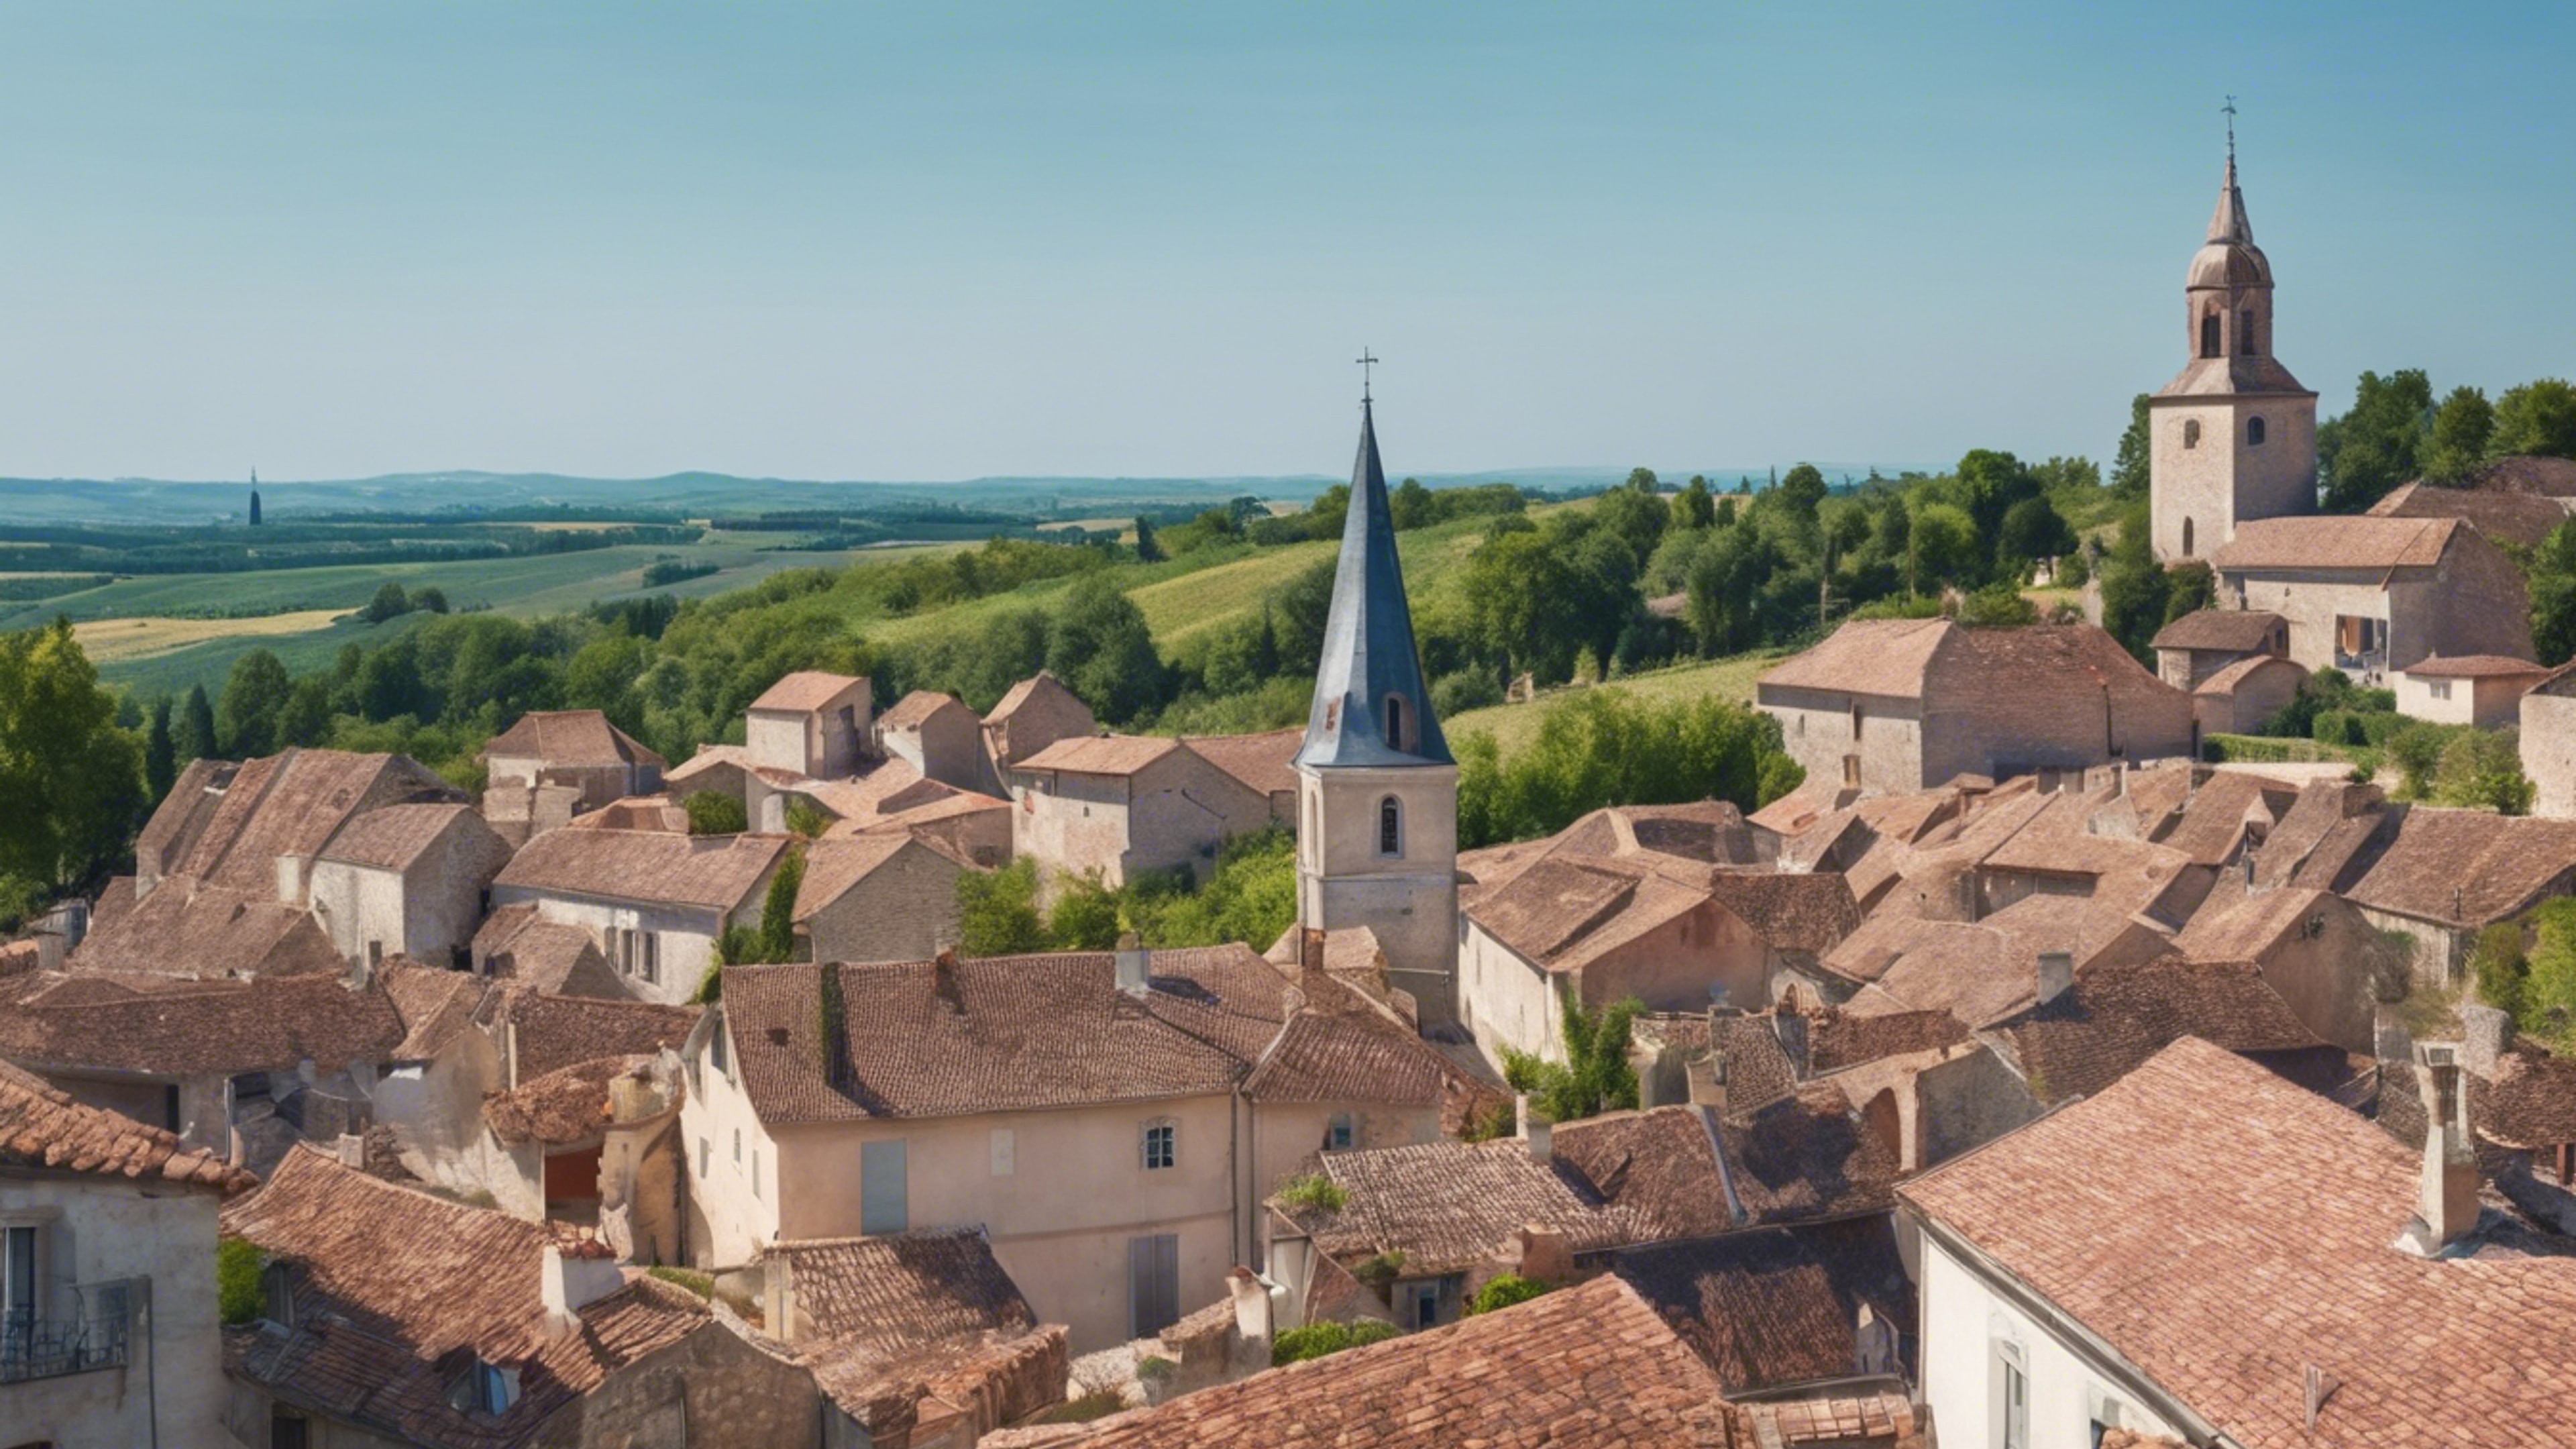 A panoramic view of a French country village with red-tiled roofs, a church spire, and surrounding vineyards under a clear blue sky. Tapeet[29c4a00e876546cab0f2]